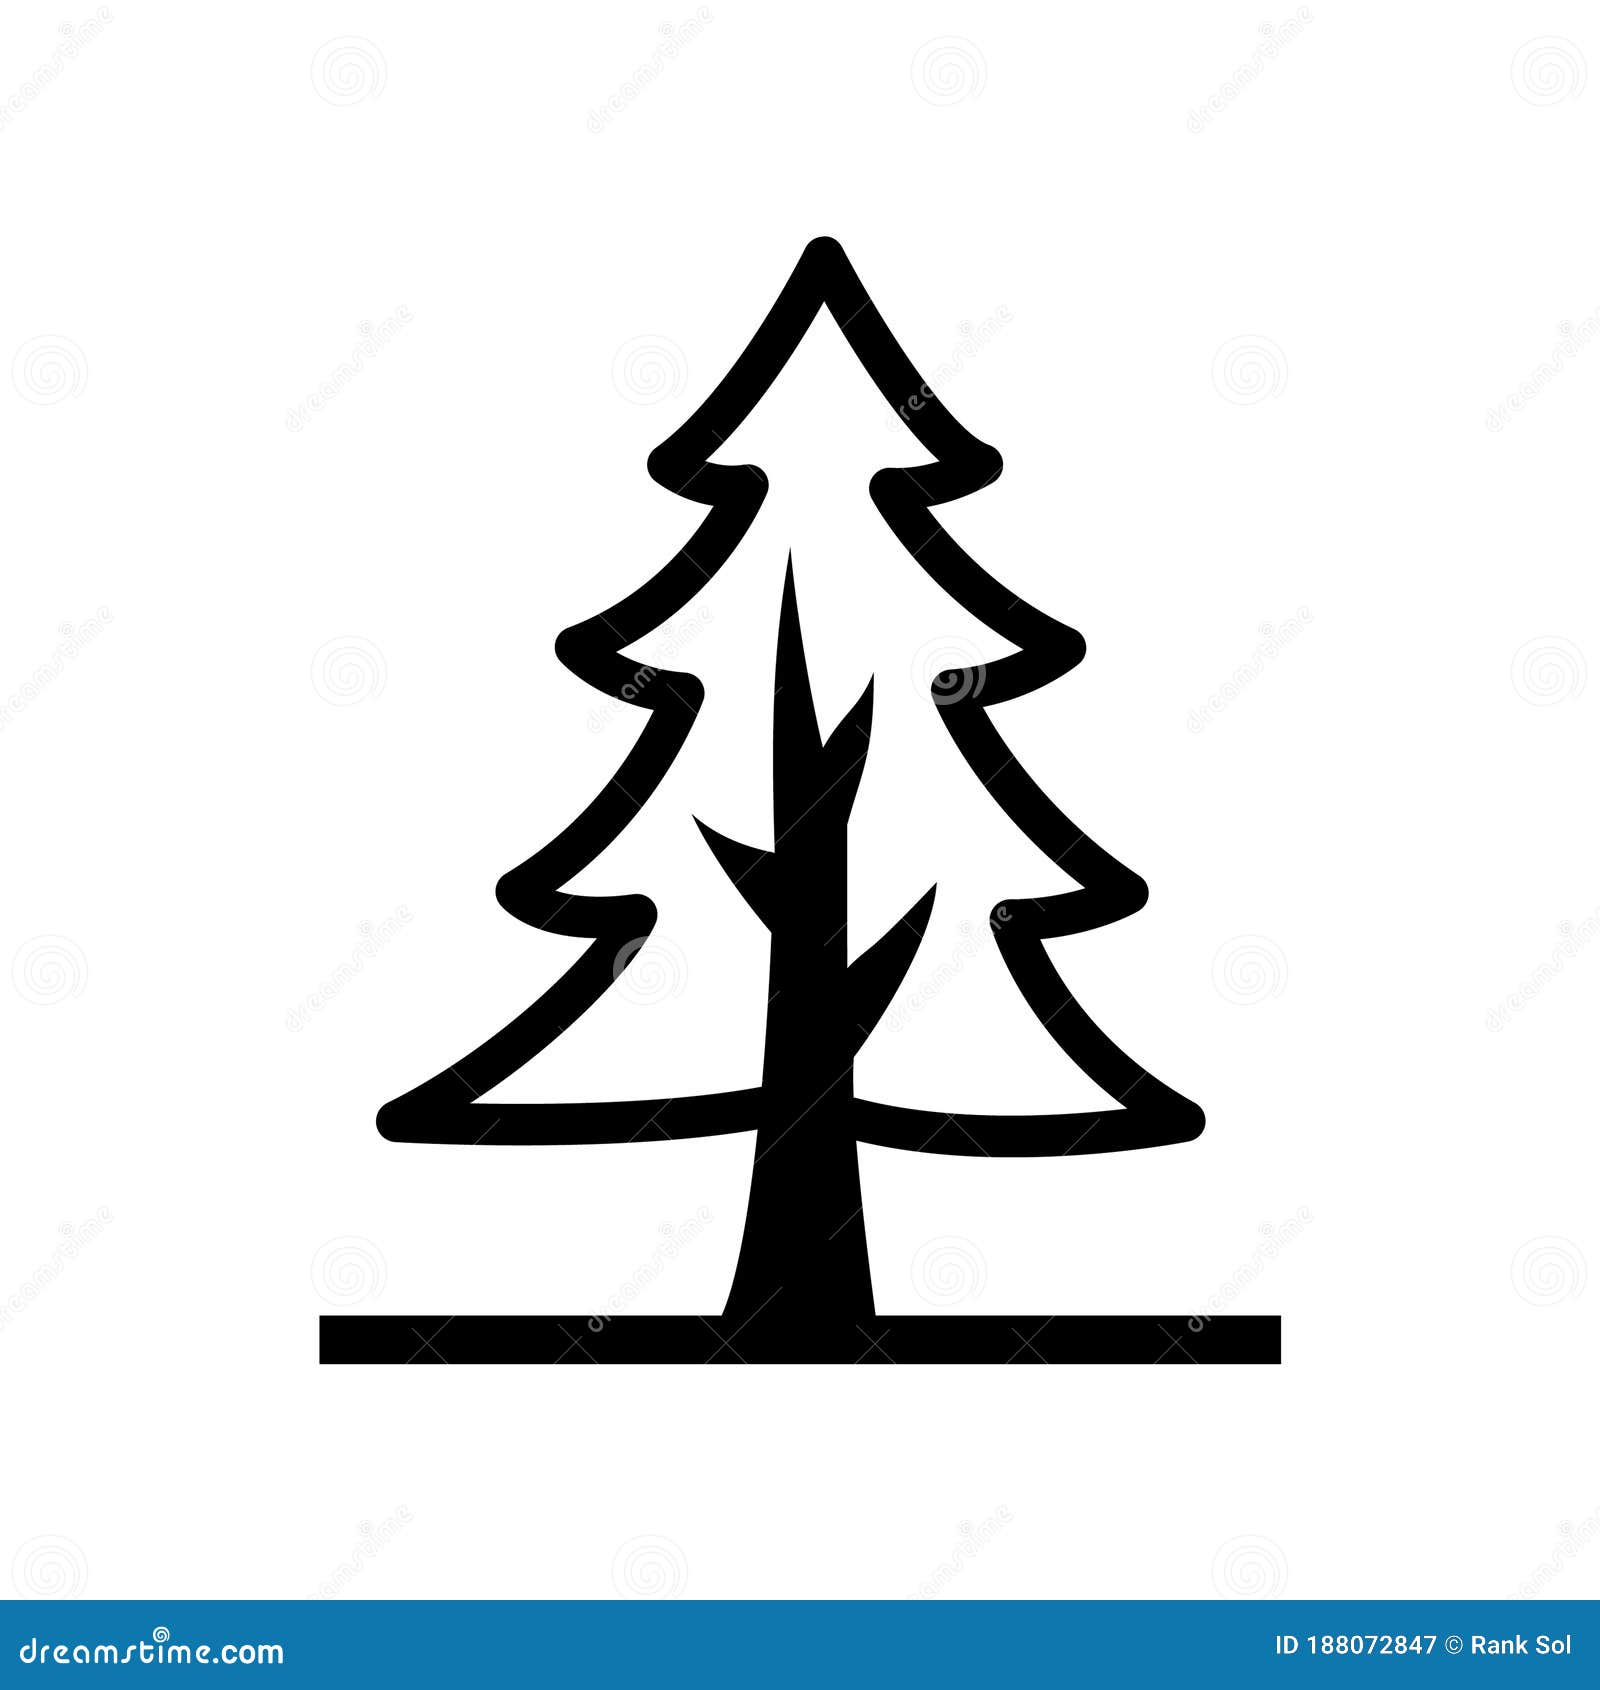 evergreen tree glyph style  icon which can easily modify or edit